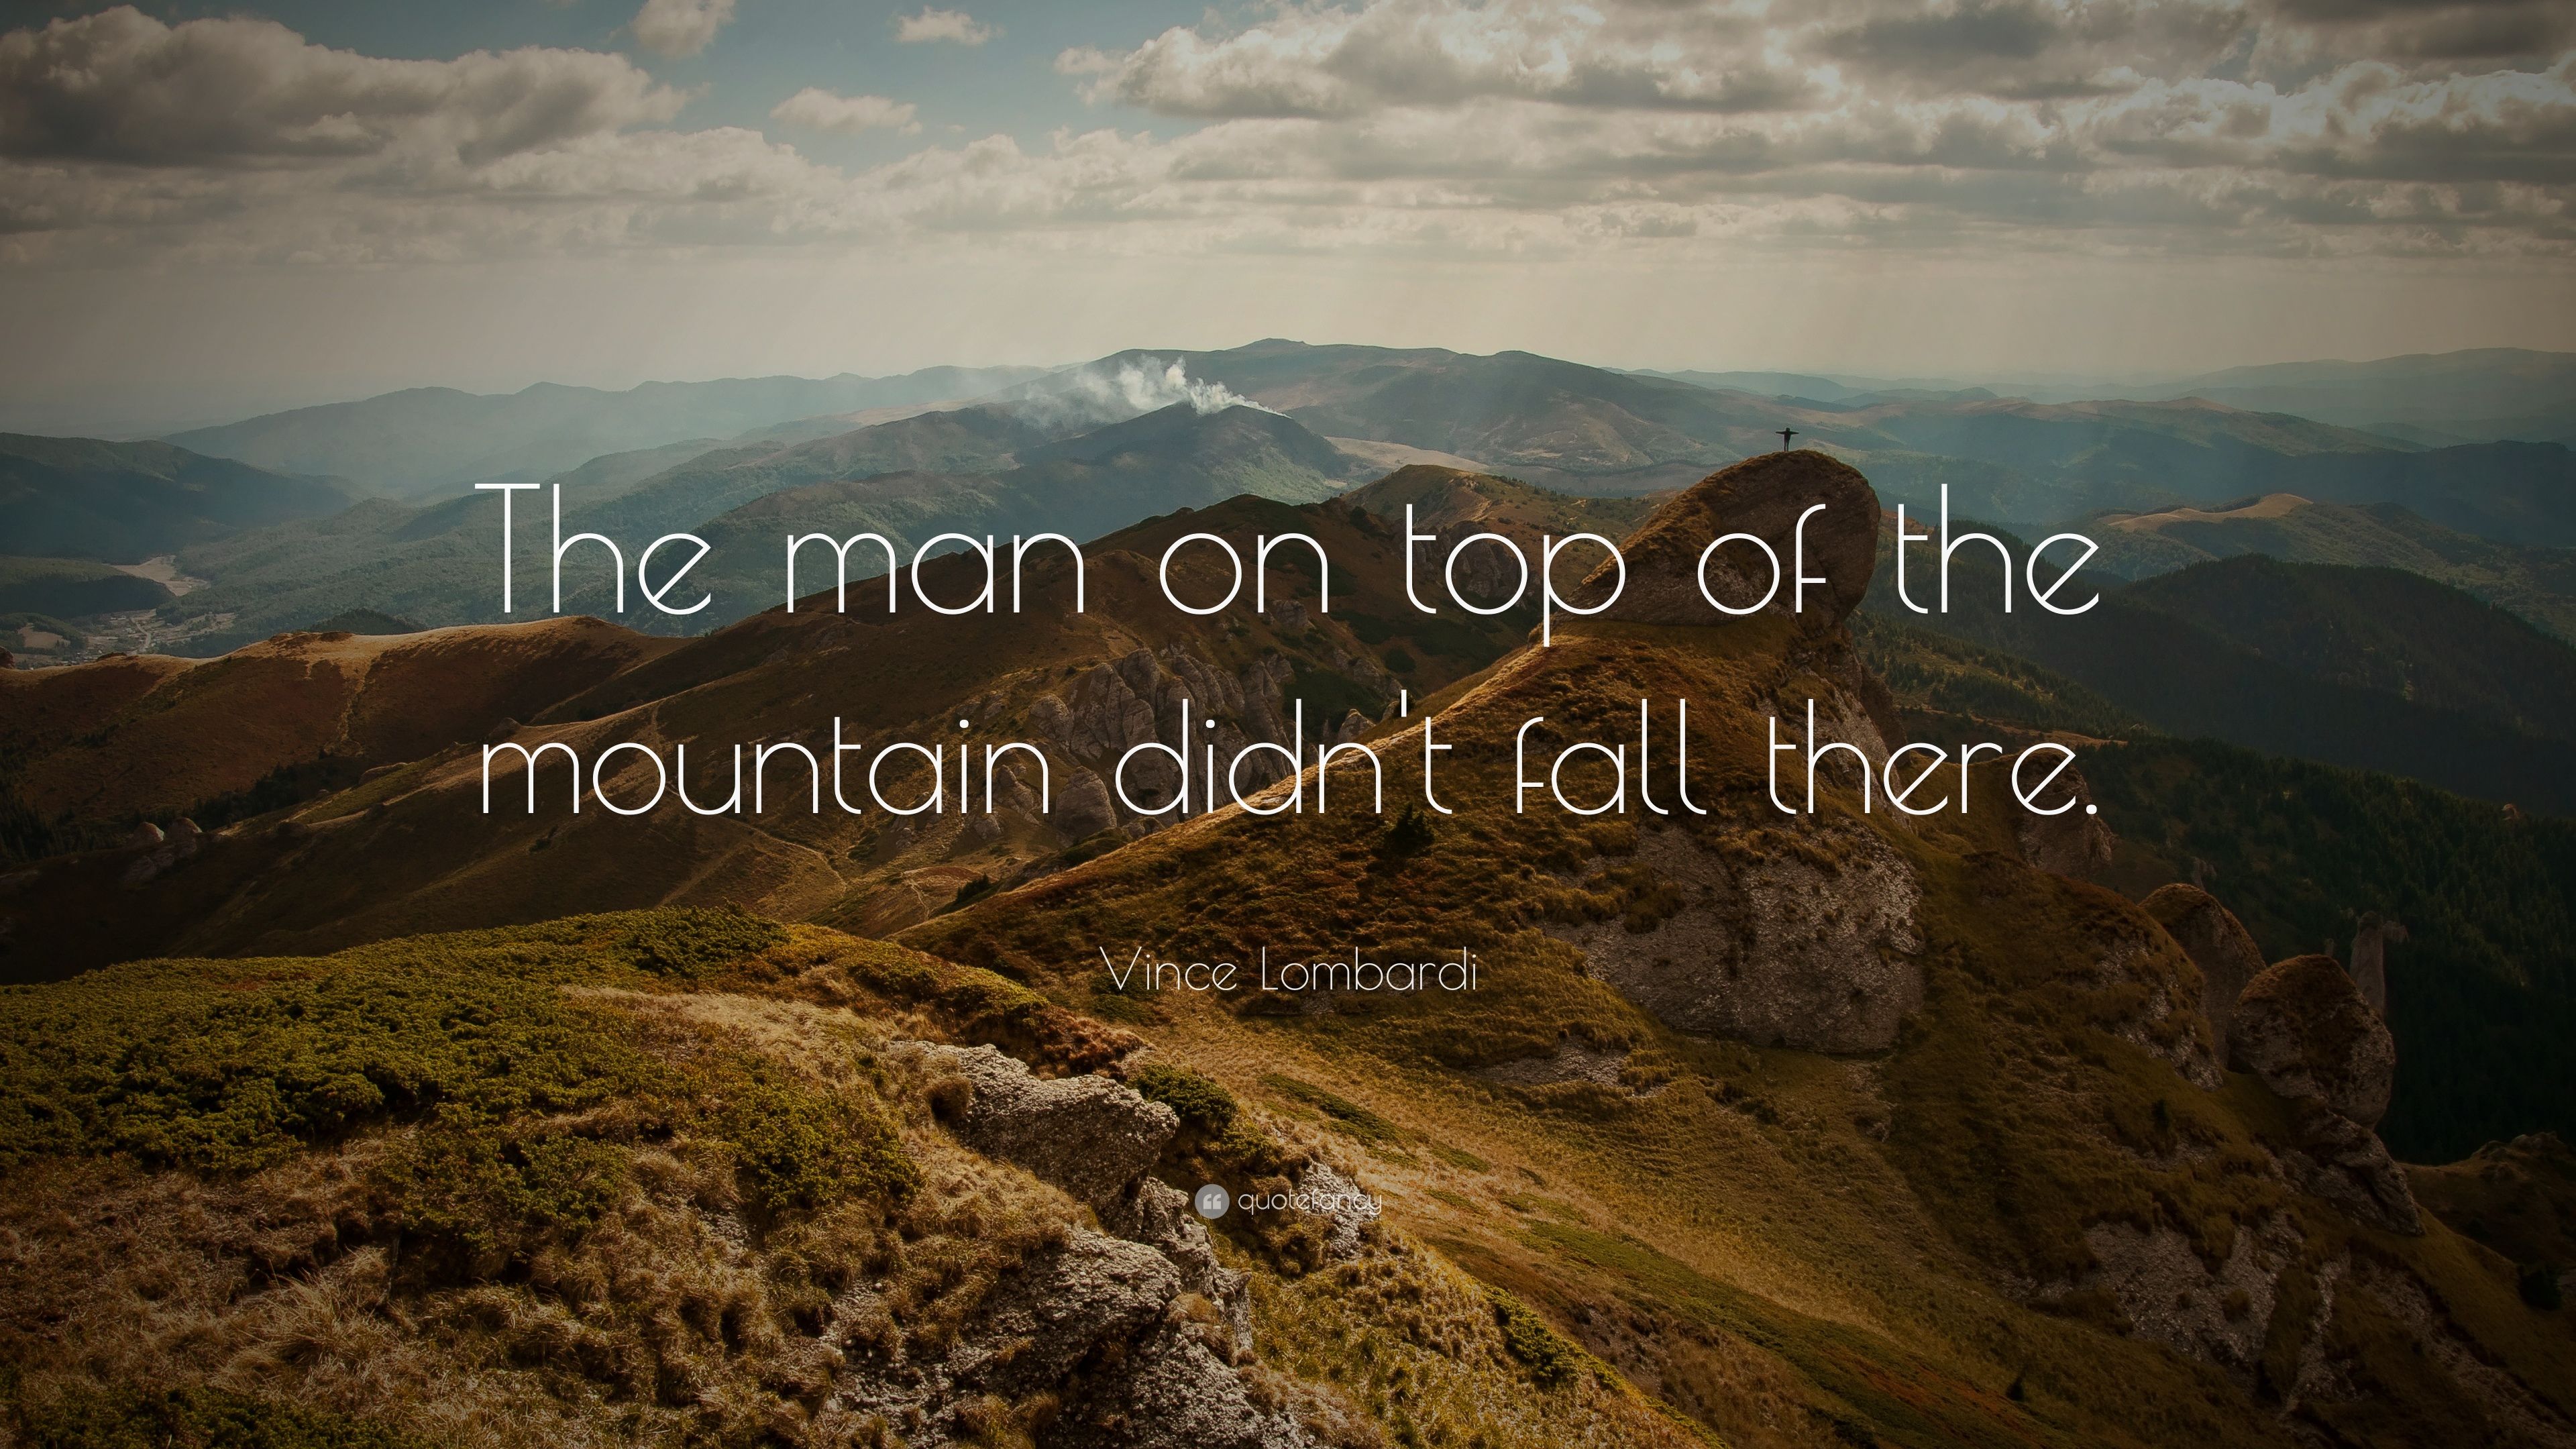 Vince Lombardi Quote: “The man on top of the mountain didn't fall